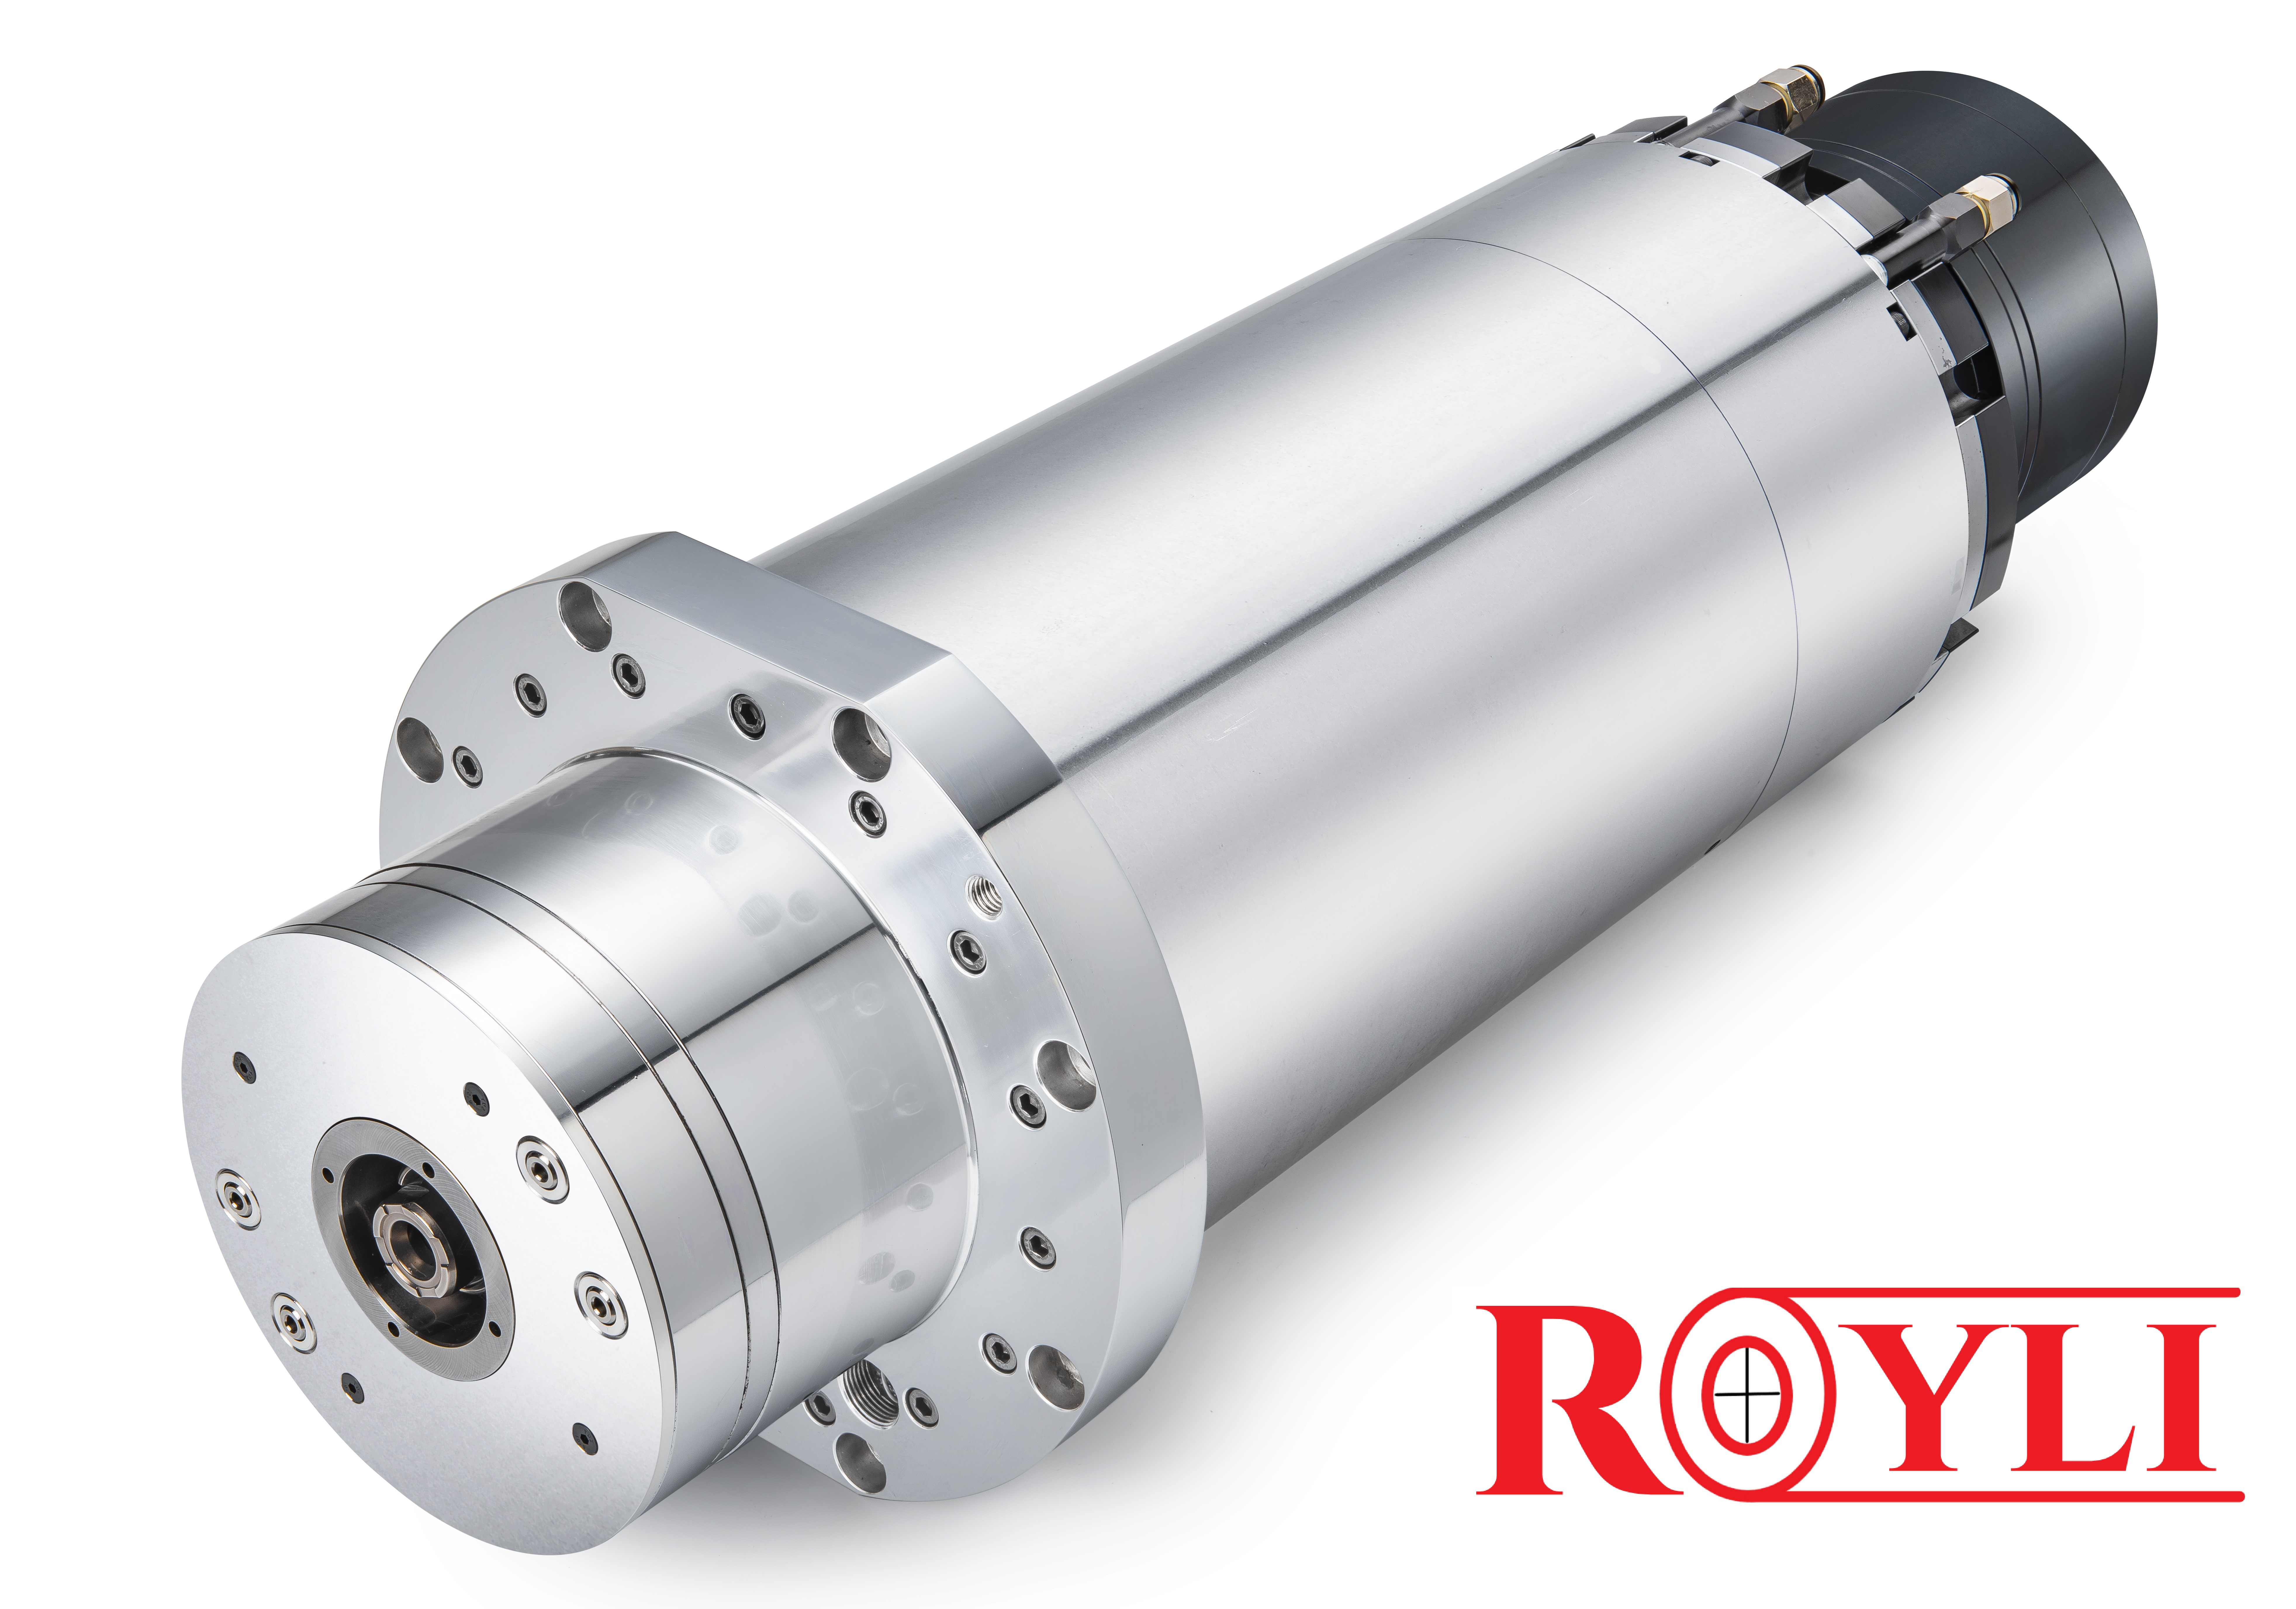 News|Your Optimized Complete Solution for Spindles - ROYLI